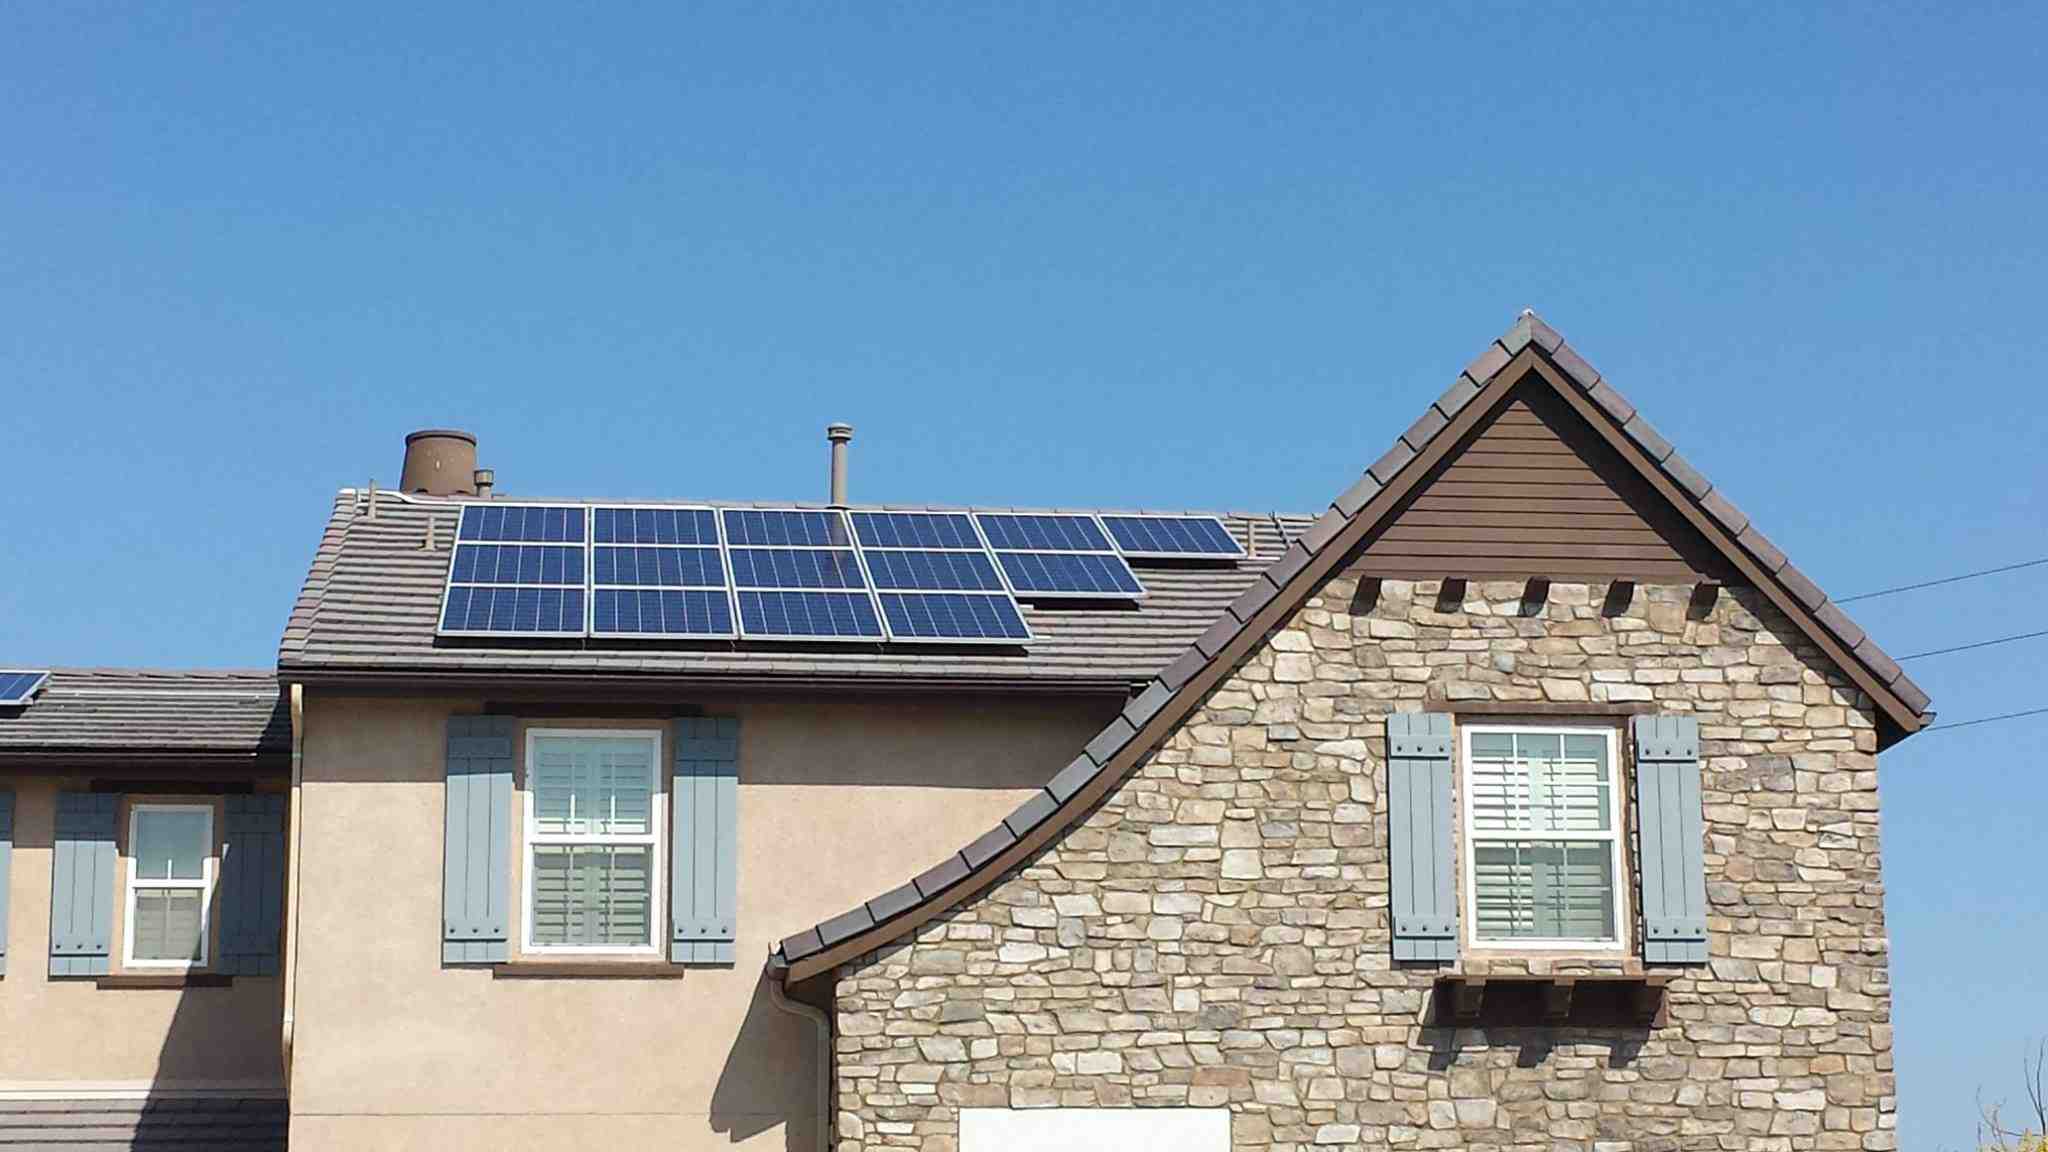 What is a major disadvantage of using solar power?